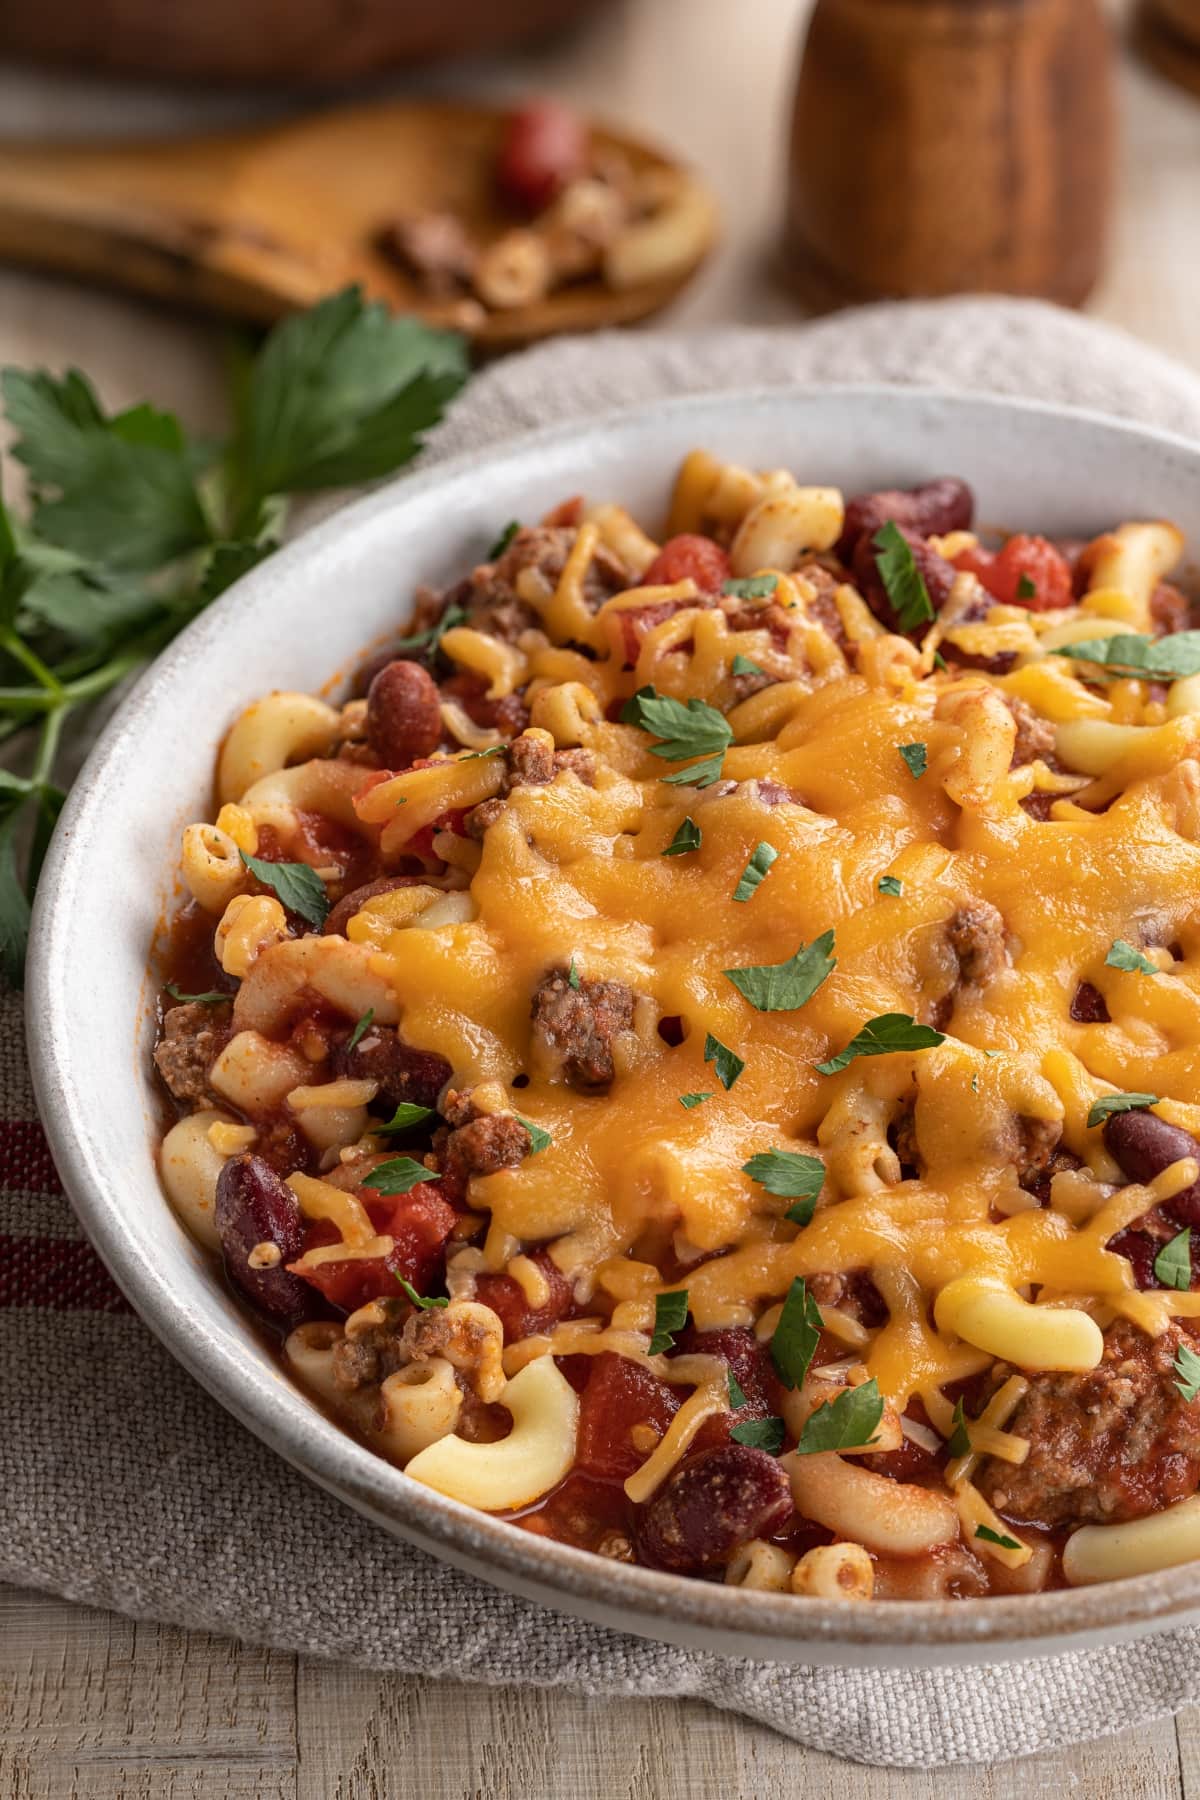 Homemade Chili Macaroni with Cheddar Cheese, Beans and Bacon